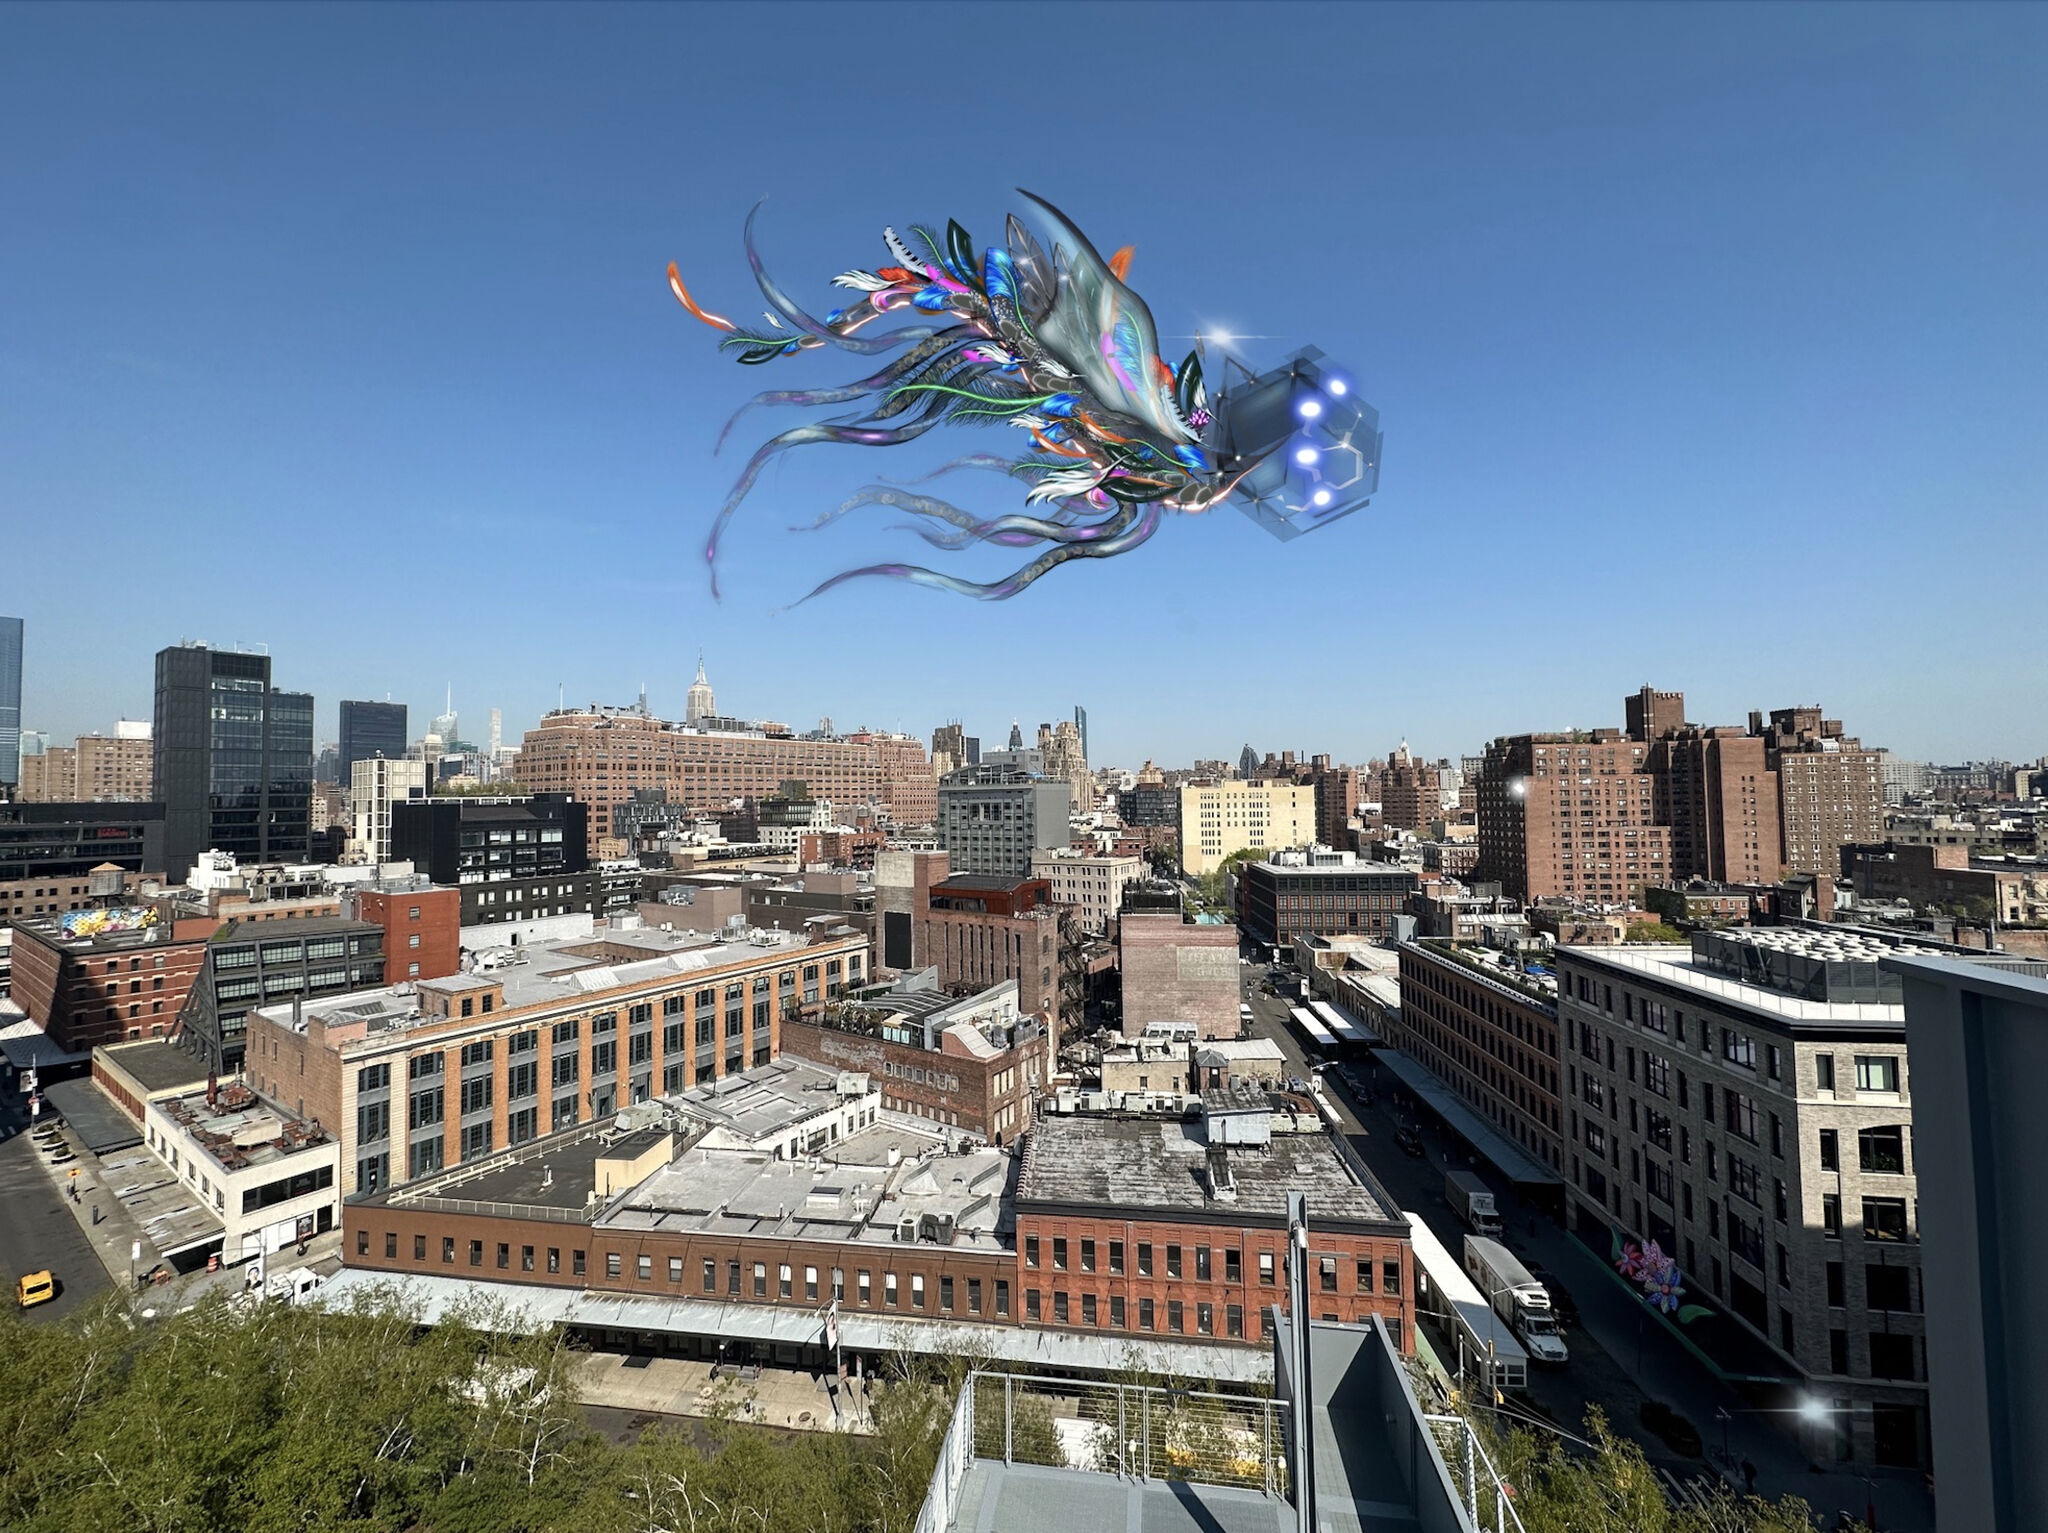 A 3D rendered creature with trailing tentacles, wings, and feathers, floats in the sky over the city view from the Whitney's 8th floor terrace.